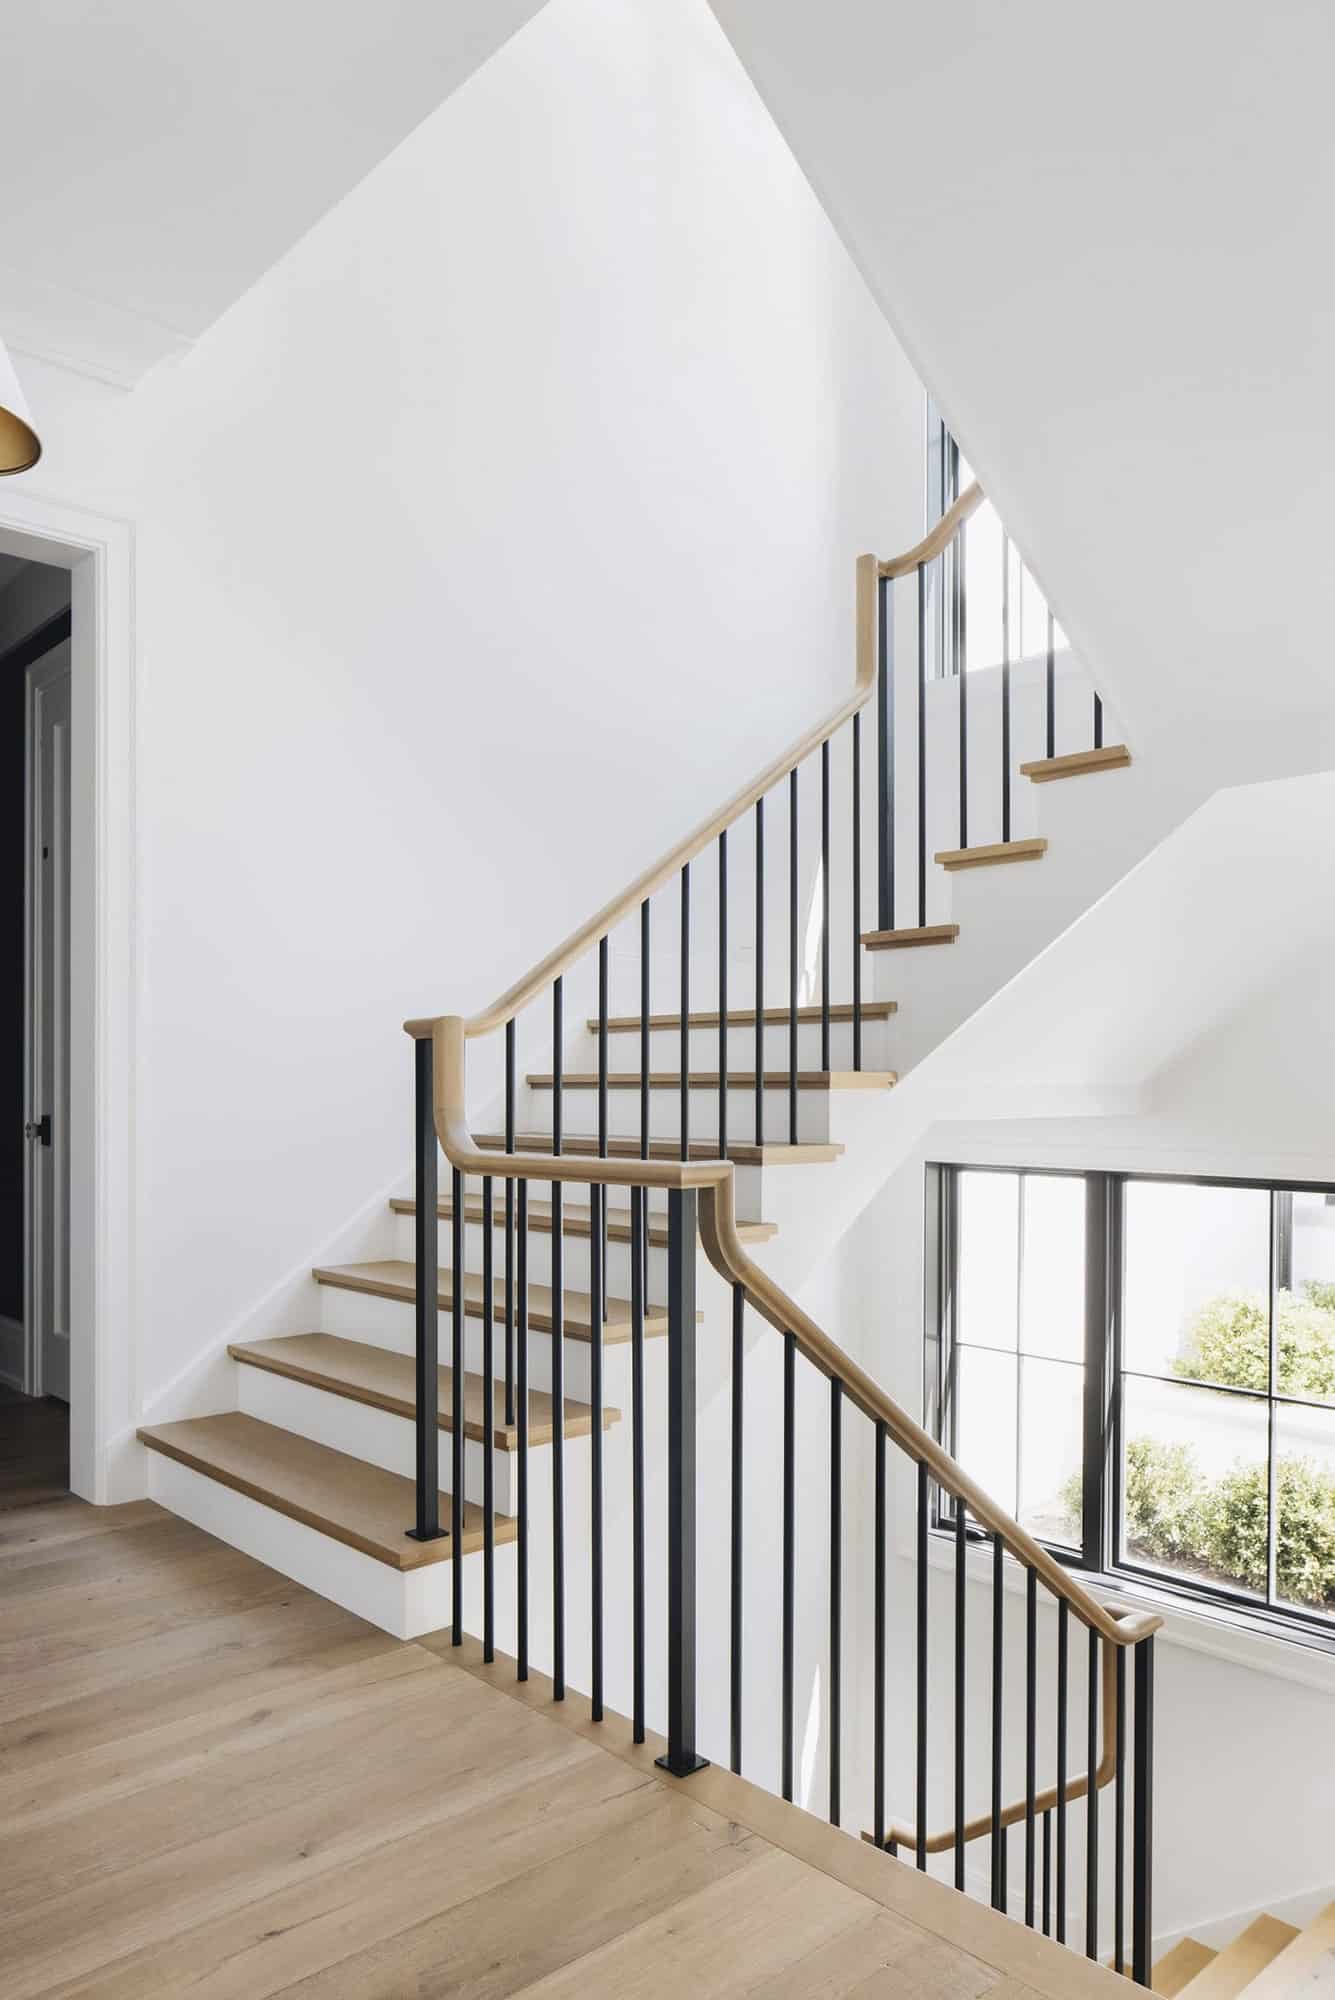  transitional-style-staircase